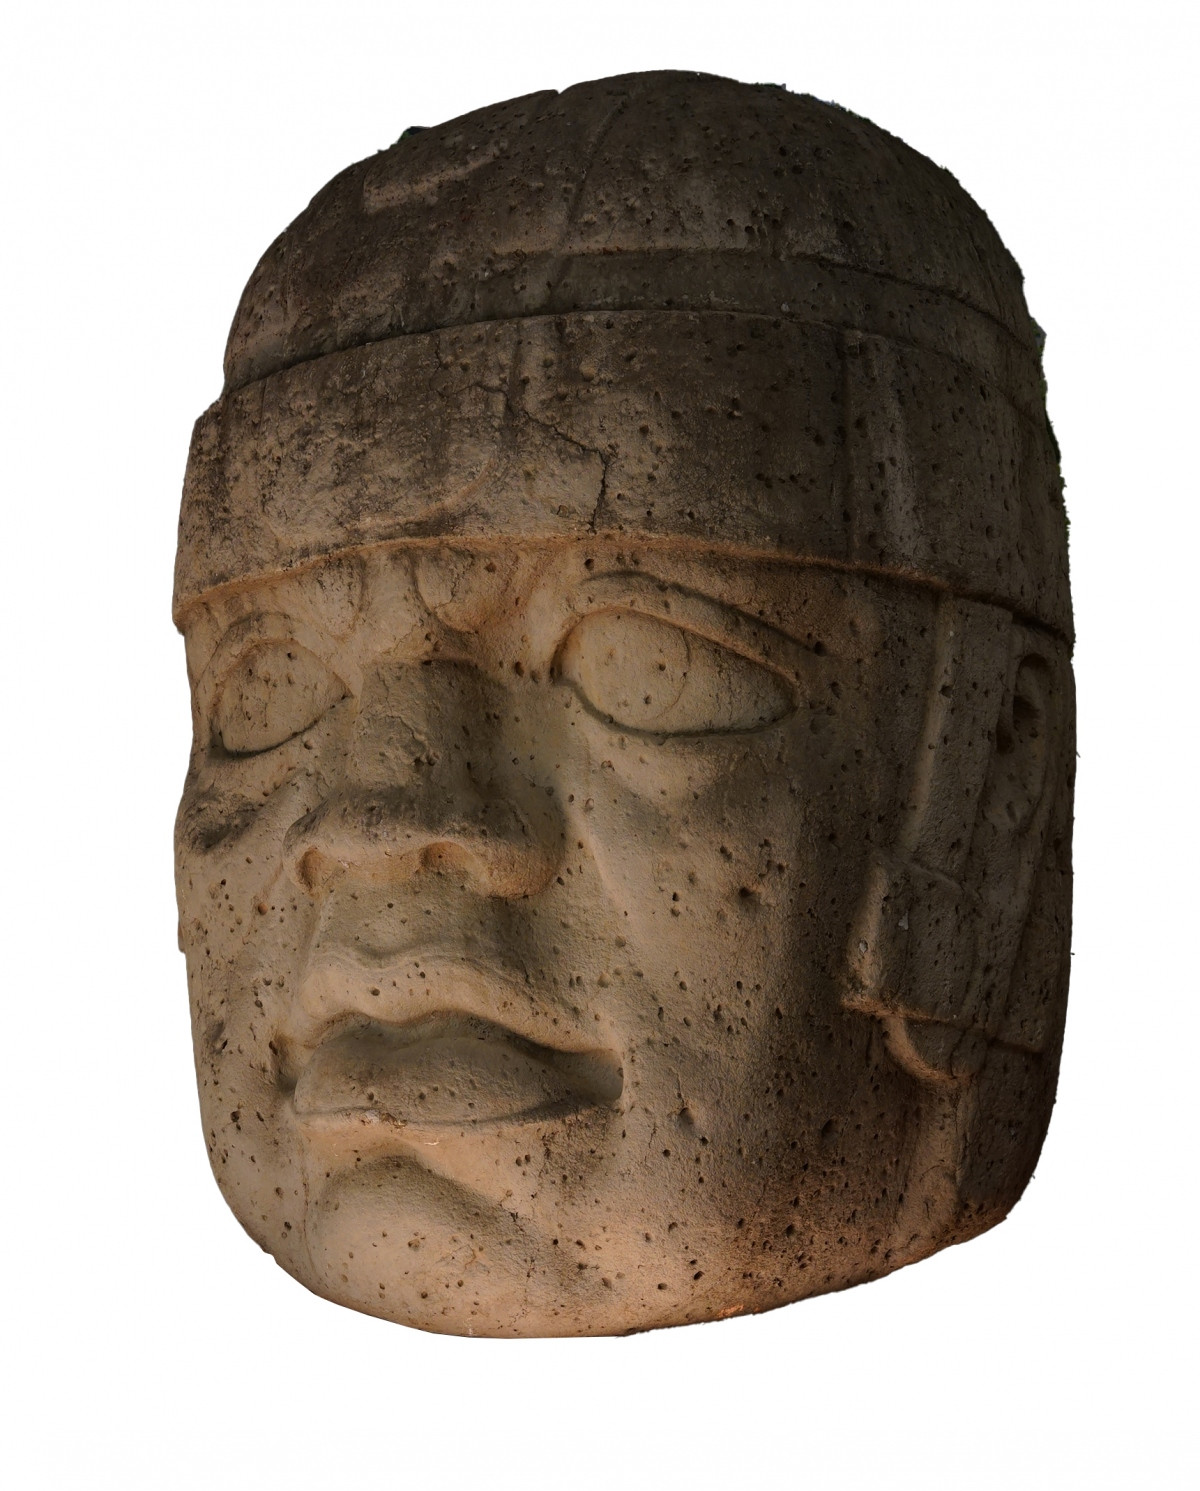 renowned monumental olmec head replica inaugurated in hcm city picture 1